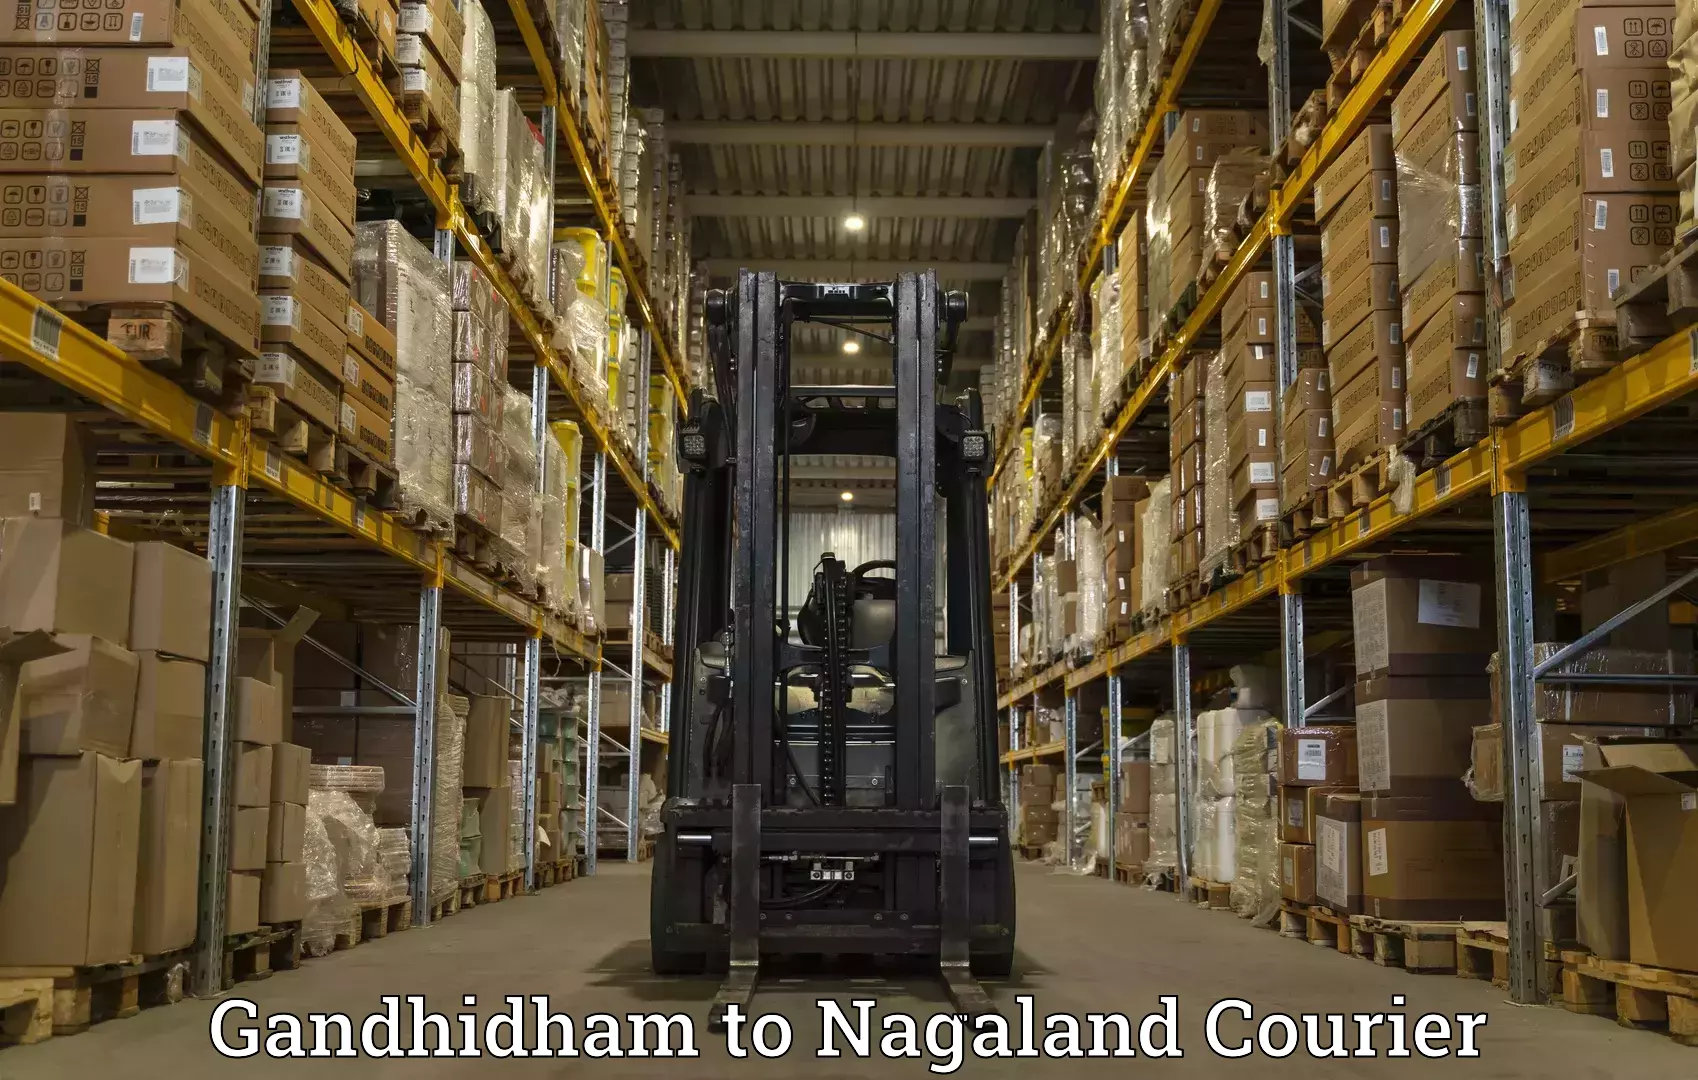 Delivery service partnership Gandhidham to Nagaland